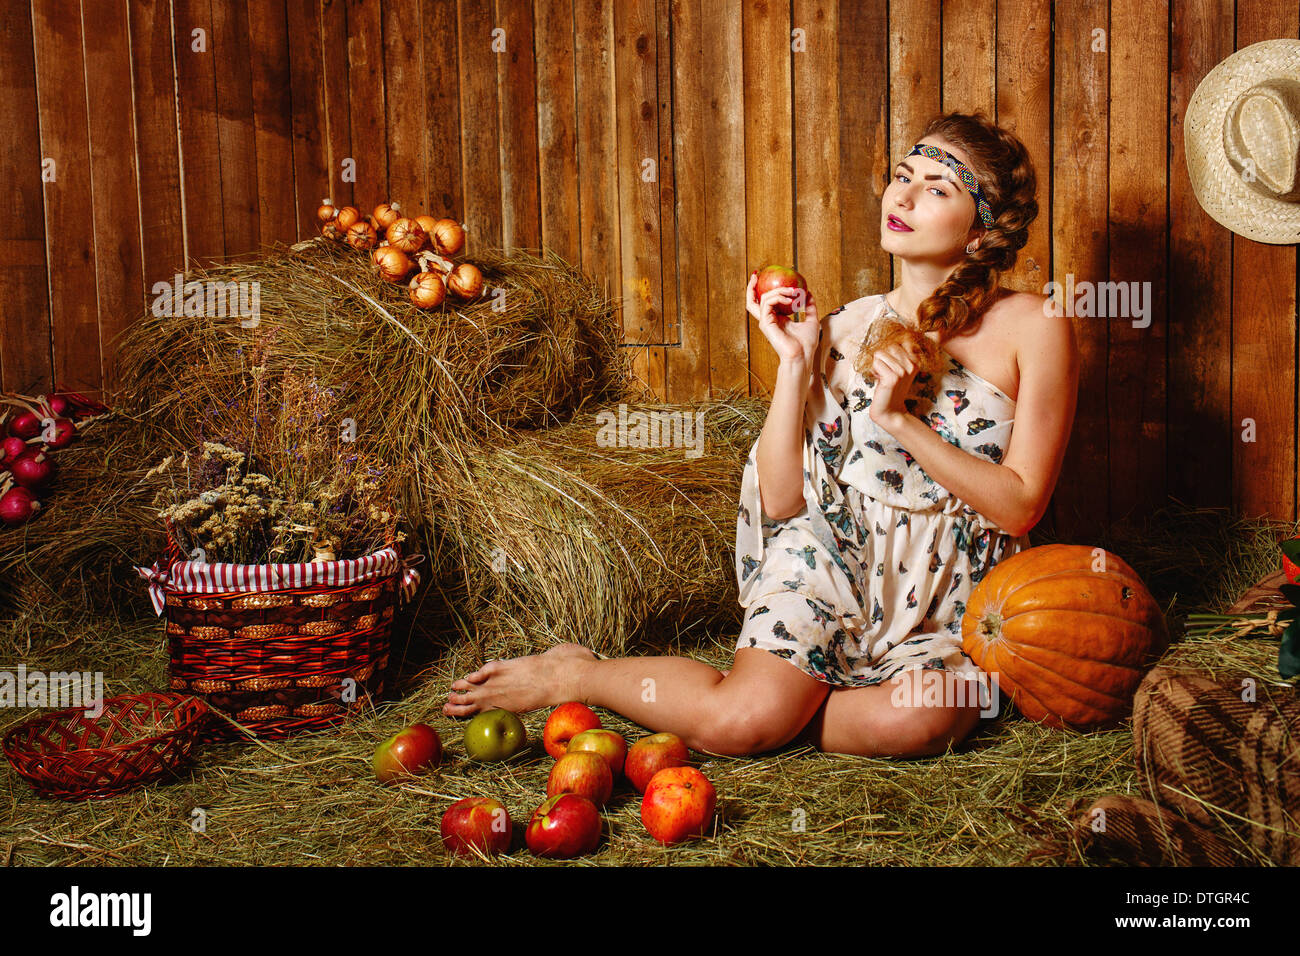 Attractive young girl sitting barefoot on the hay in the barn Stock Photo